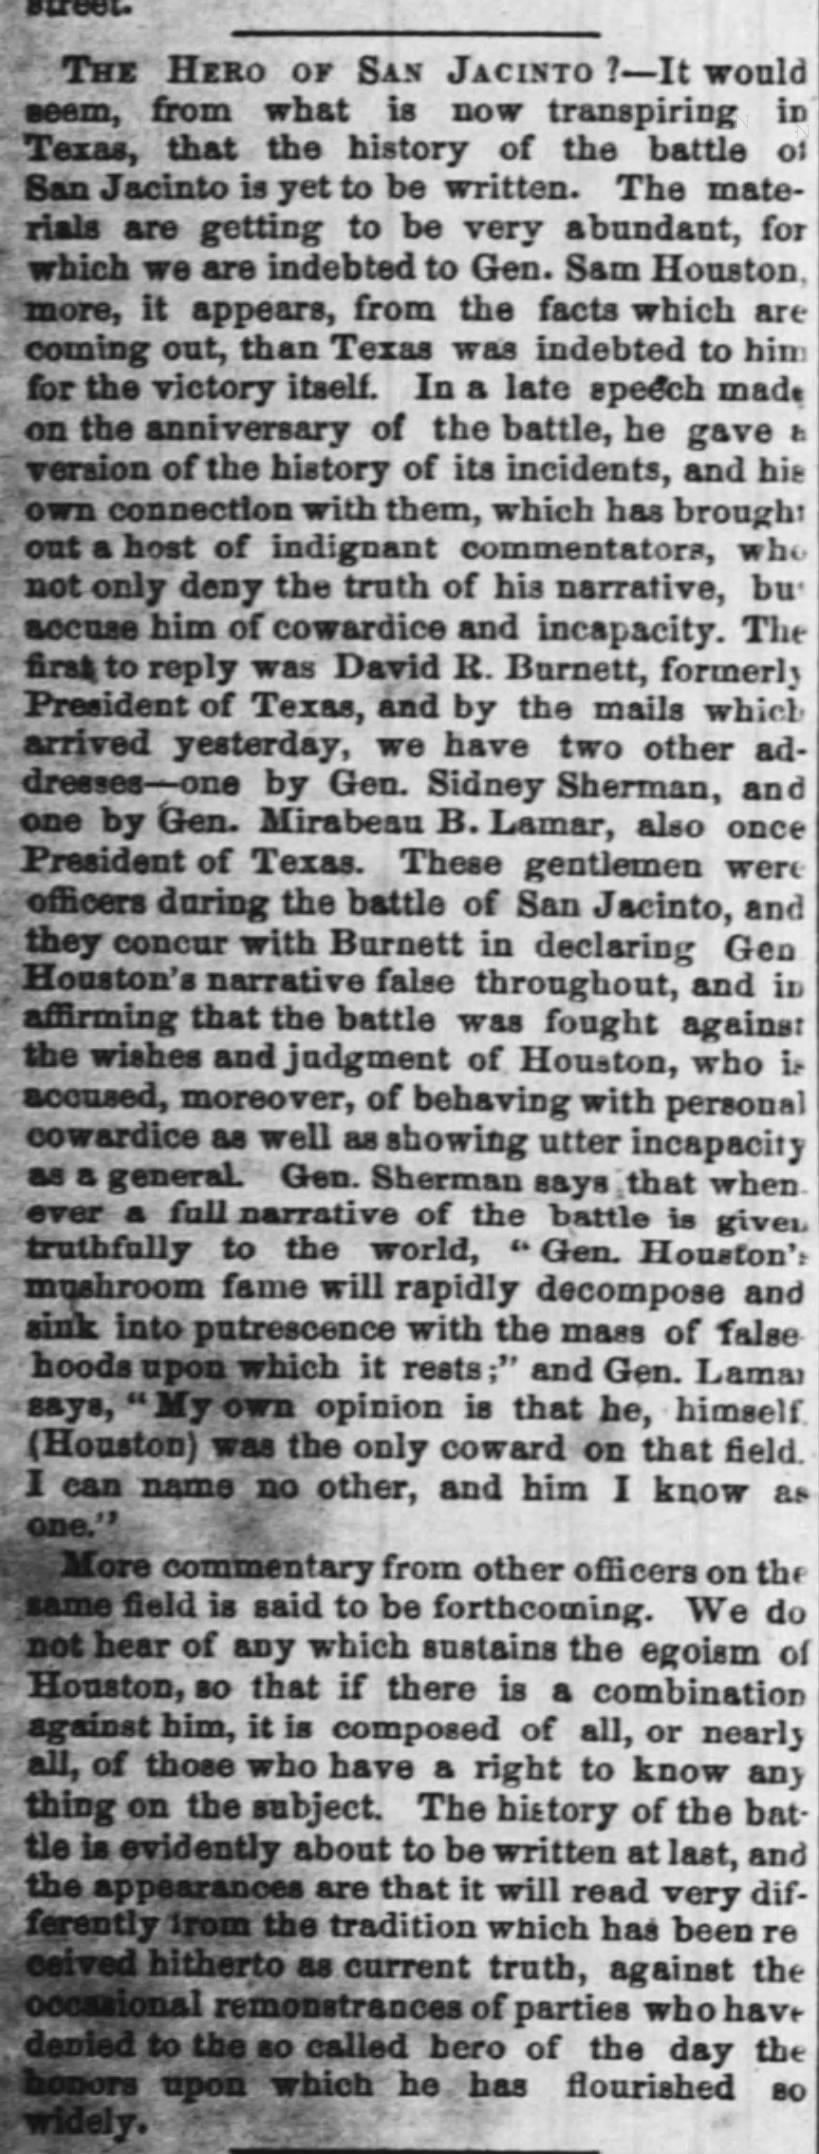 More details about the cowardliness of Sam Houston in The Battle of San Jacinto